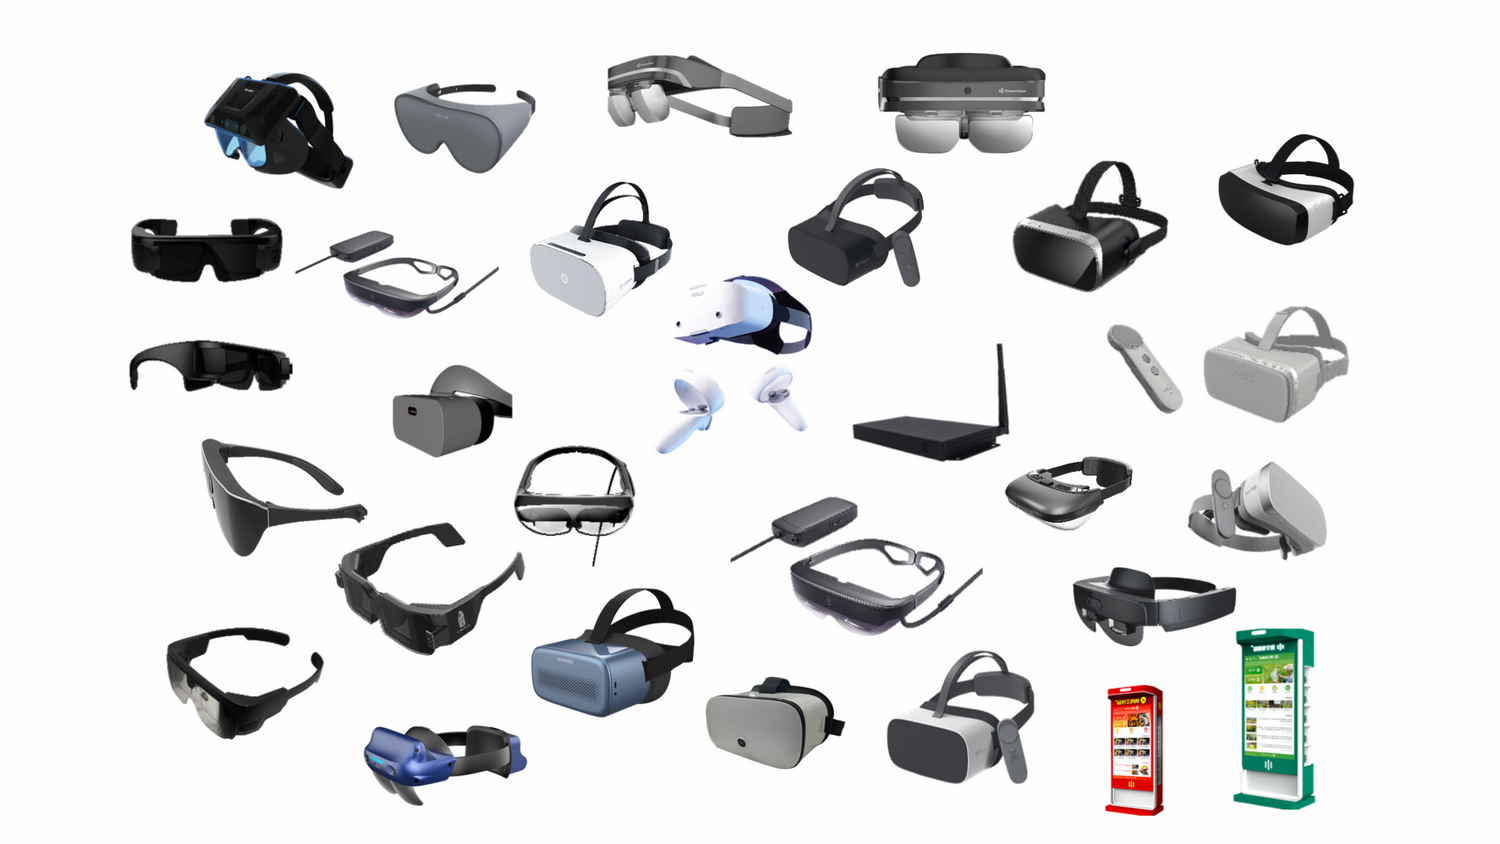 Nibiru hardware provides custom white label VR/AR headsets, OOT box, tablet, and workstations for enterprieses